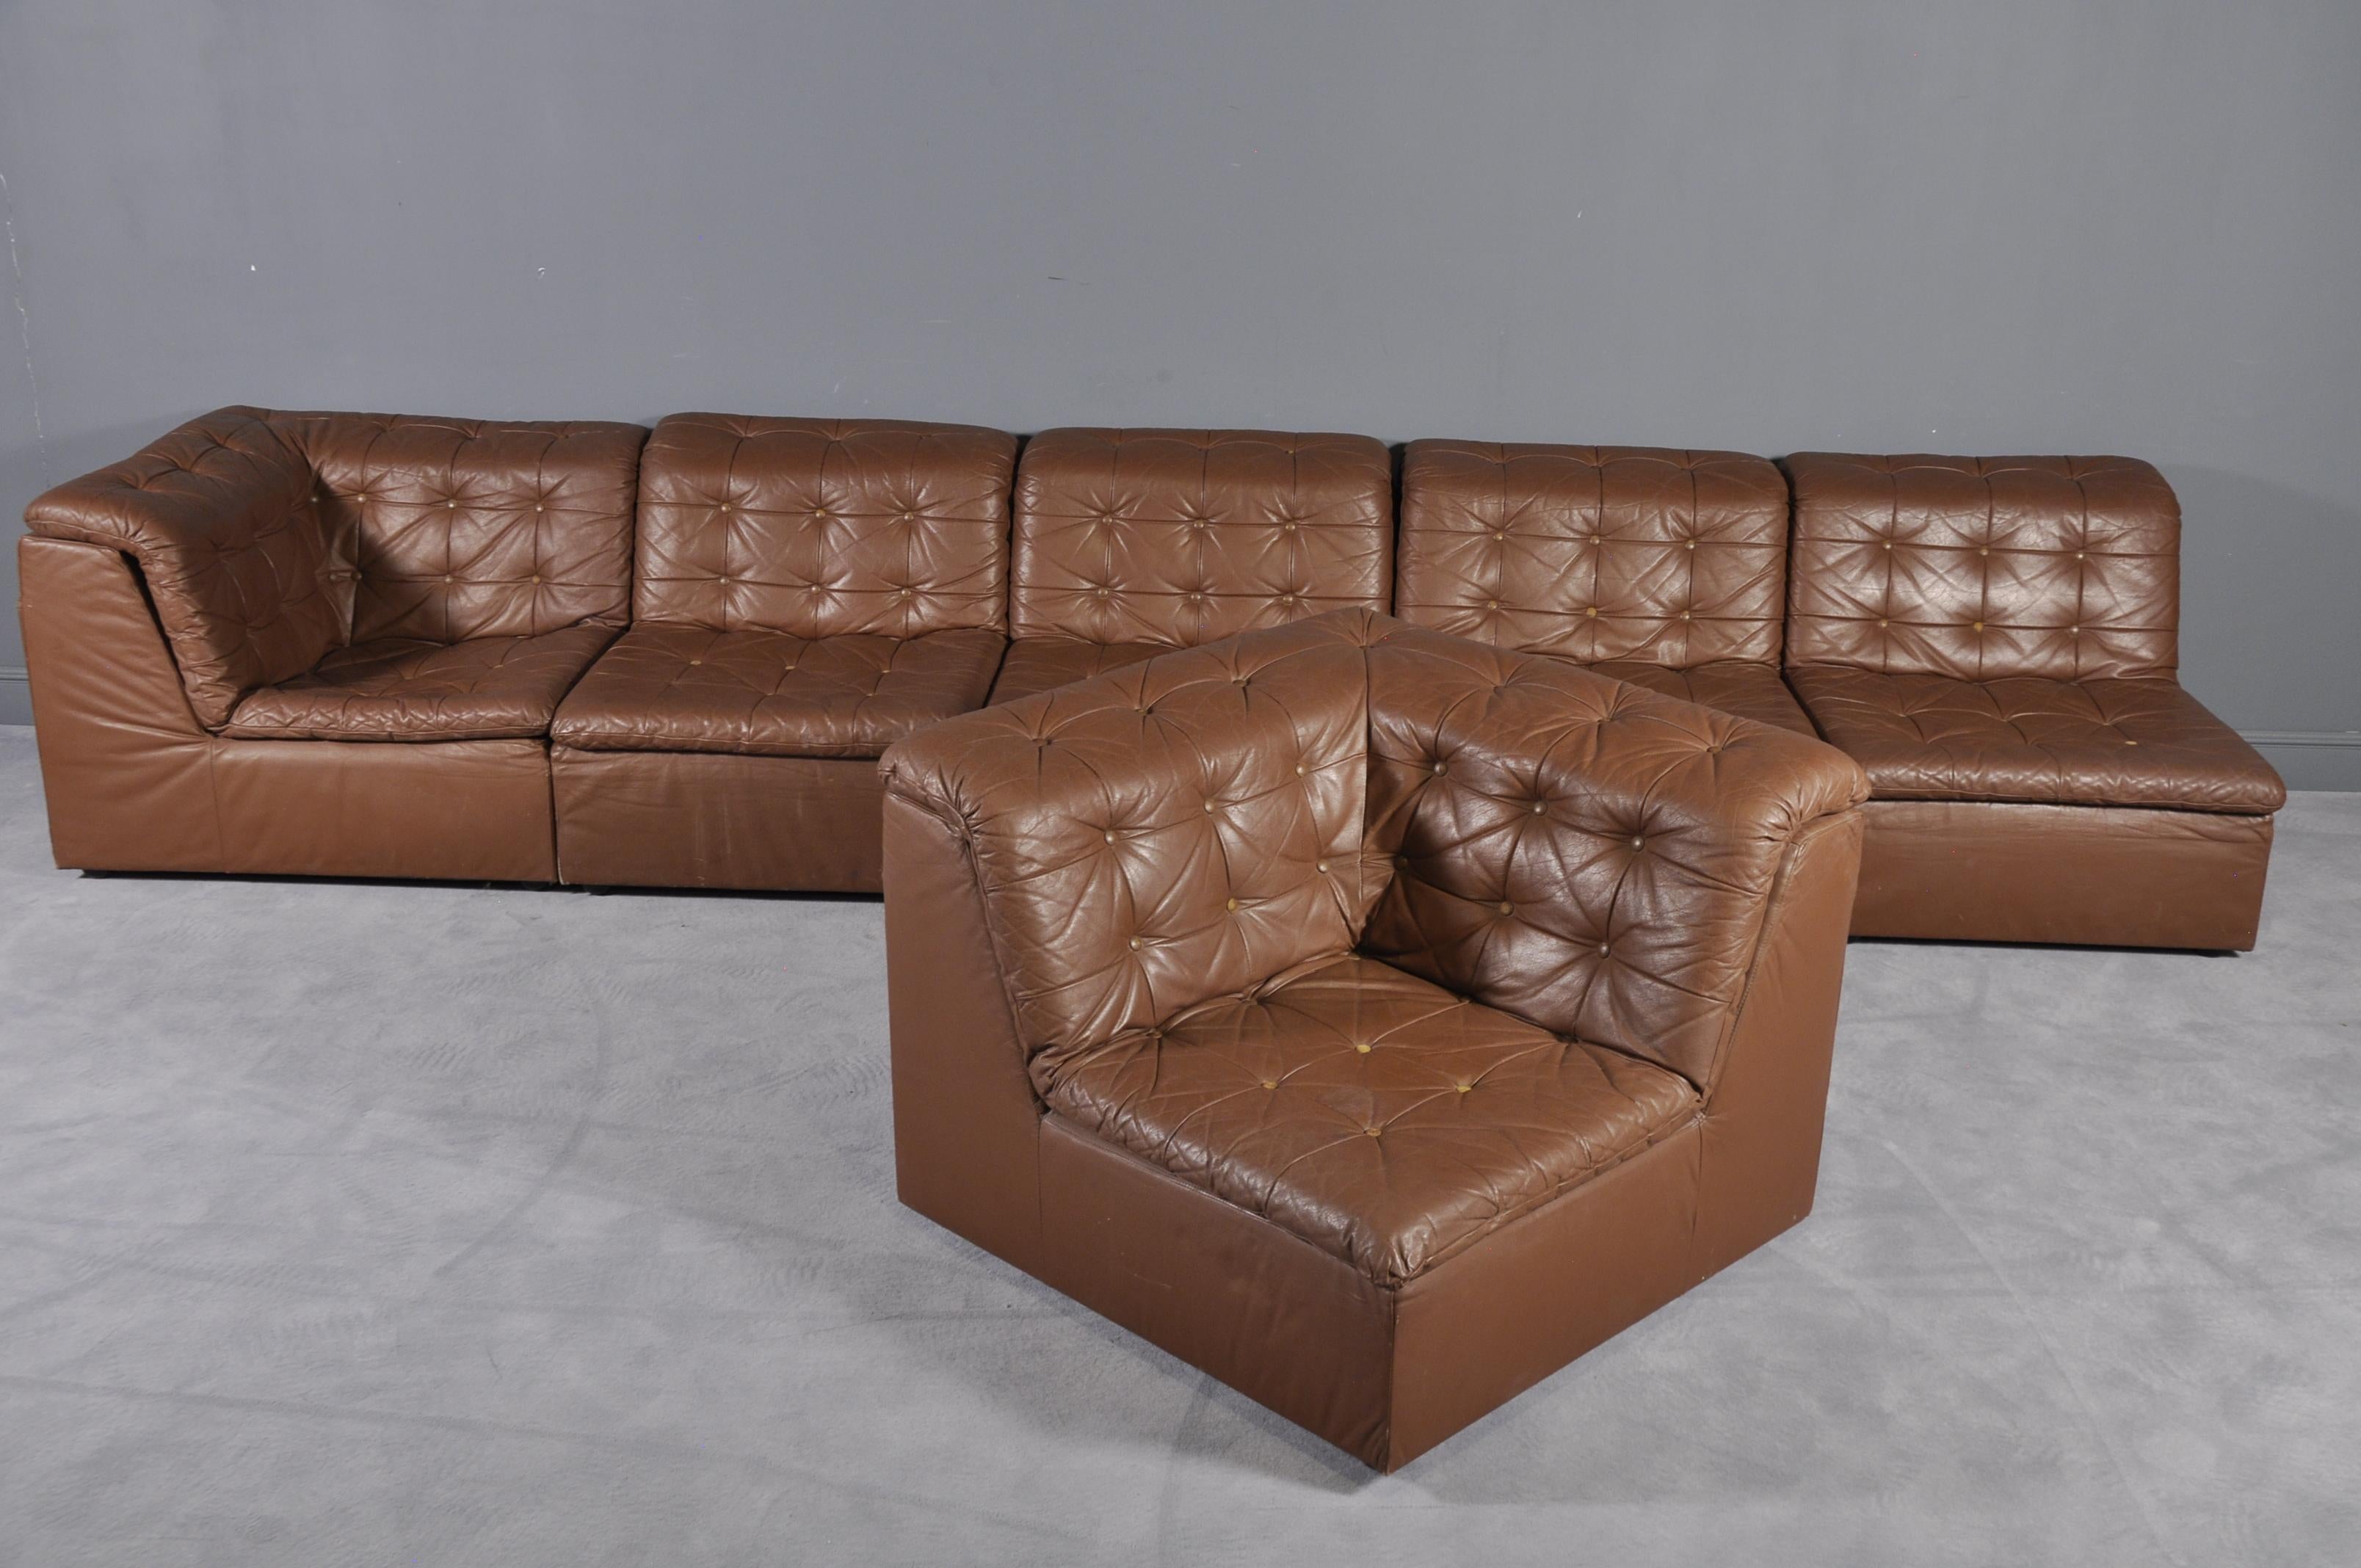 Late 20th Century Cognac Leather “De Sede Style” Patchwork Modular Sofa from Laauser, Germany 1970 For Sale